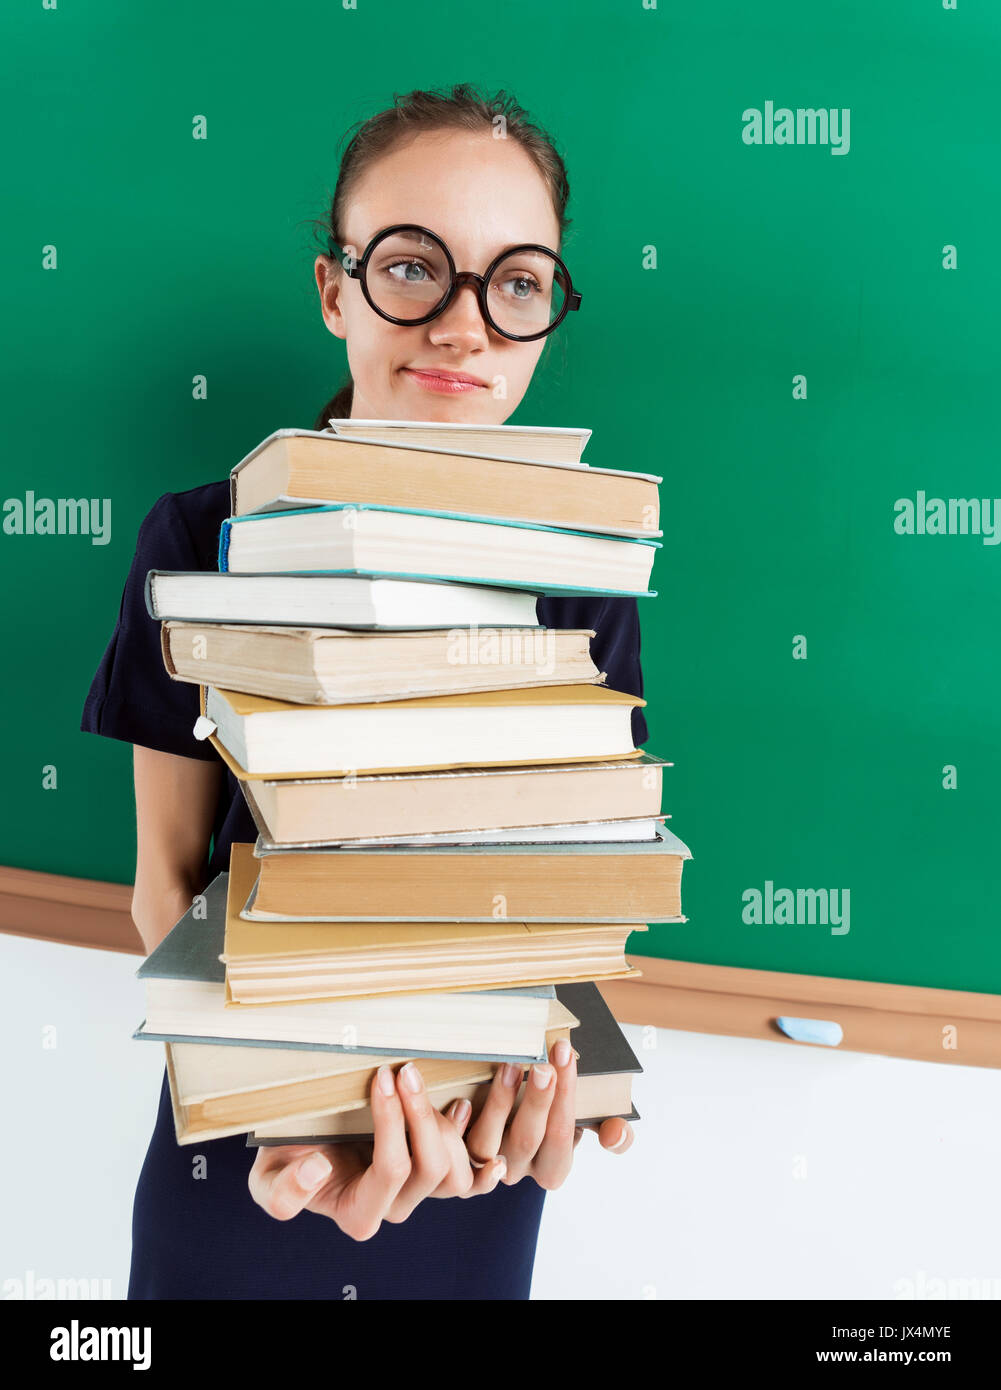 Unhappy student with stack of books near blackboard, education concept. Back to school!! Stock Photo